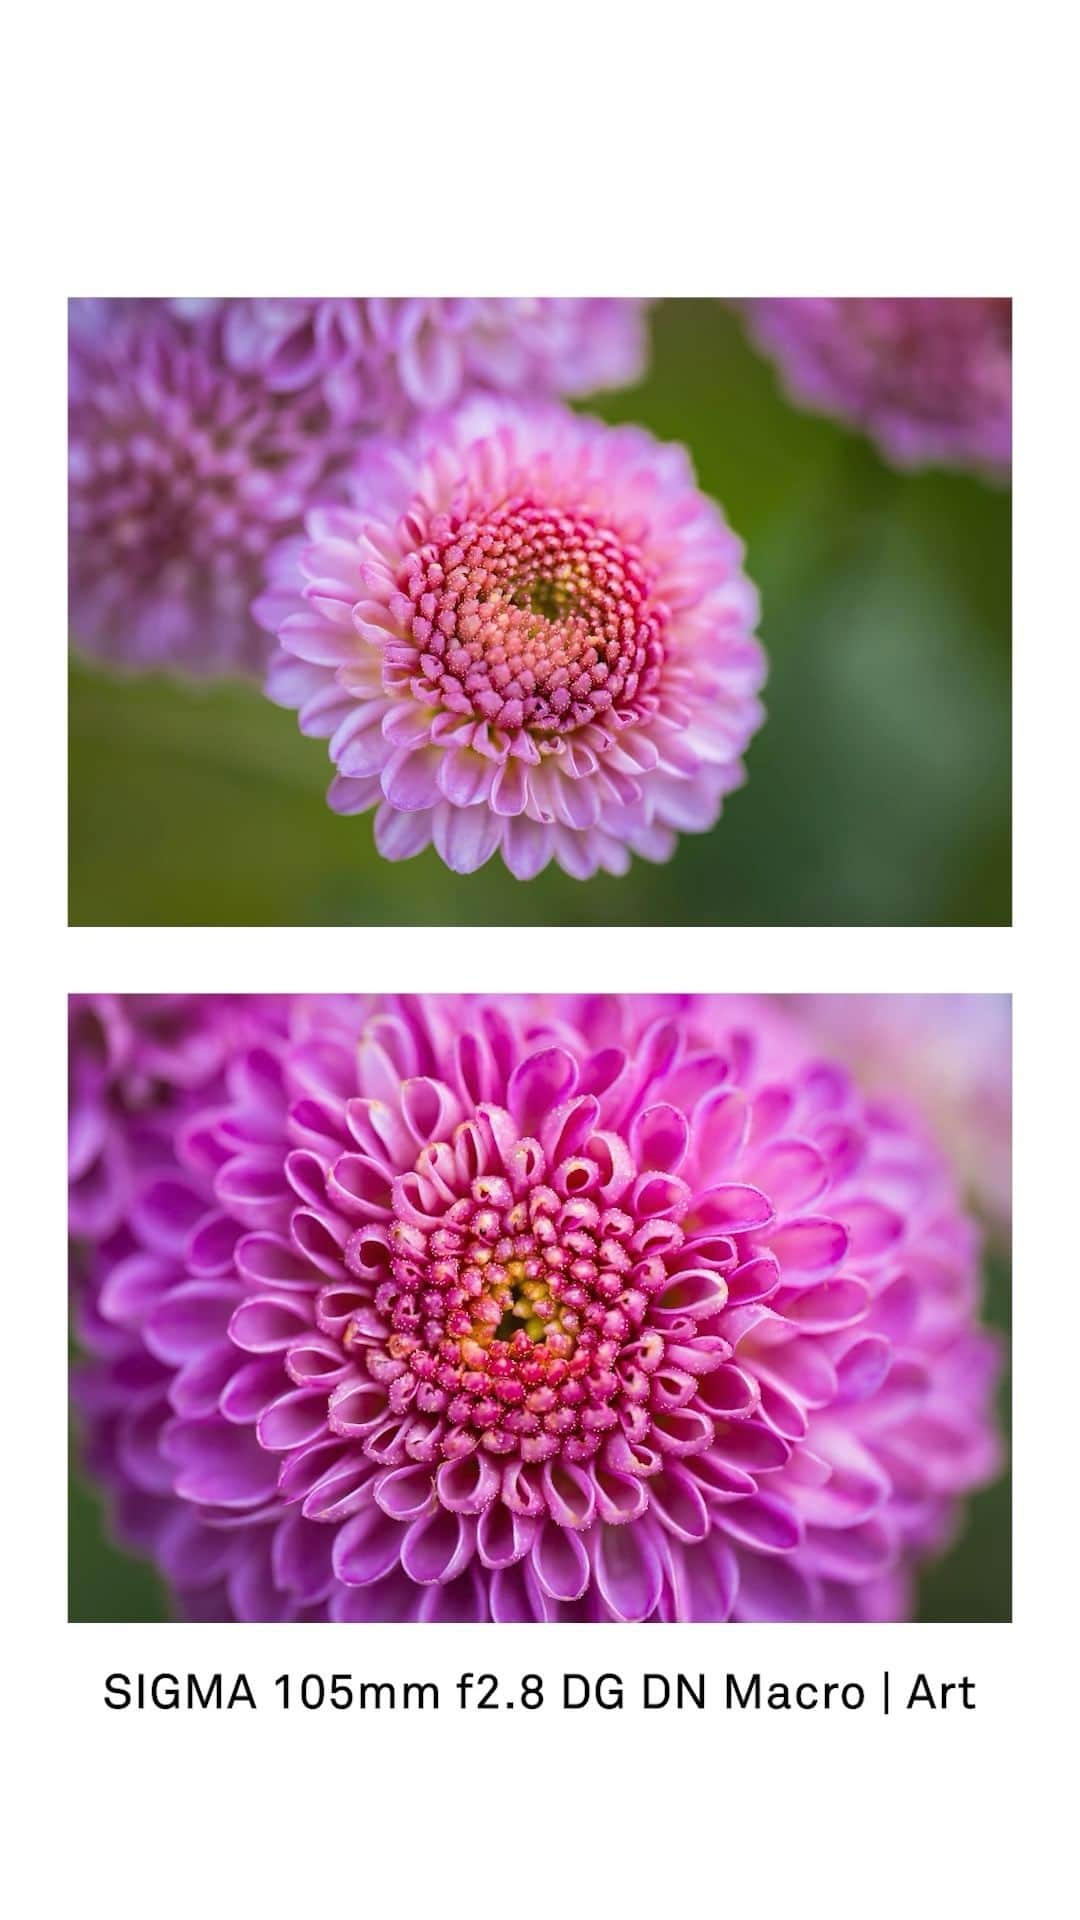 Sigma Corp Of America（シグマ）のインスタグラム：「SIGMA Ambassador @heatherlarkin.fairyography teamed up with @samys_camera a few weeks ago to host a Macro Photography class and here is how it went!   🌸 Were you able to join us for this event? To check out all upcoming SIGMA events, visit bit.ly/sigma-events or click the link in our bio 🌸  #SIGMA #SIGMAphoto #photo #photography #macrophotography #macrophoto #photoevent #sigma105mmmacro #macrolens」